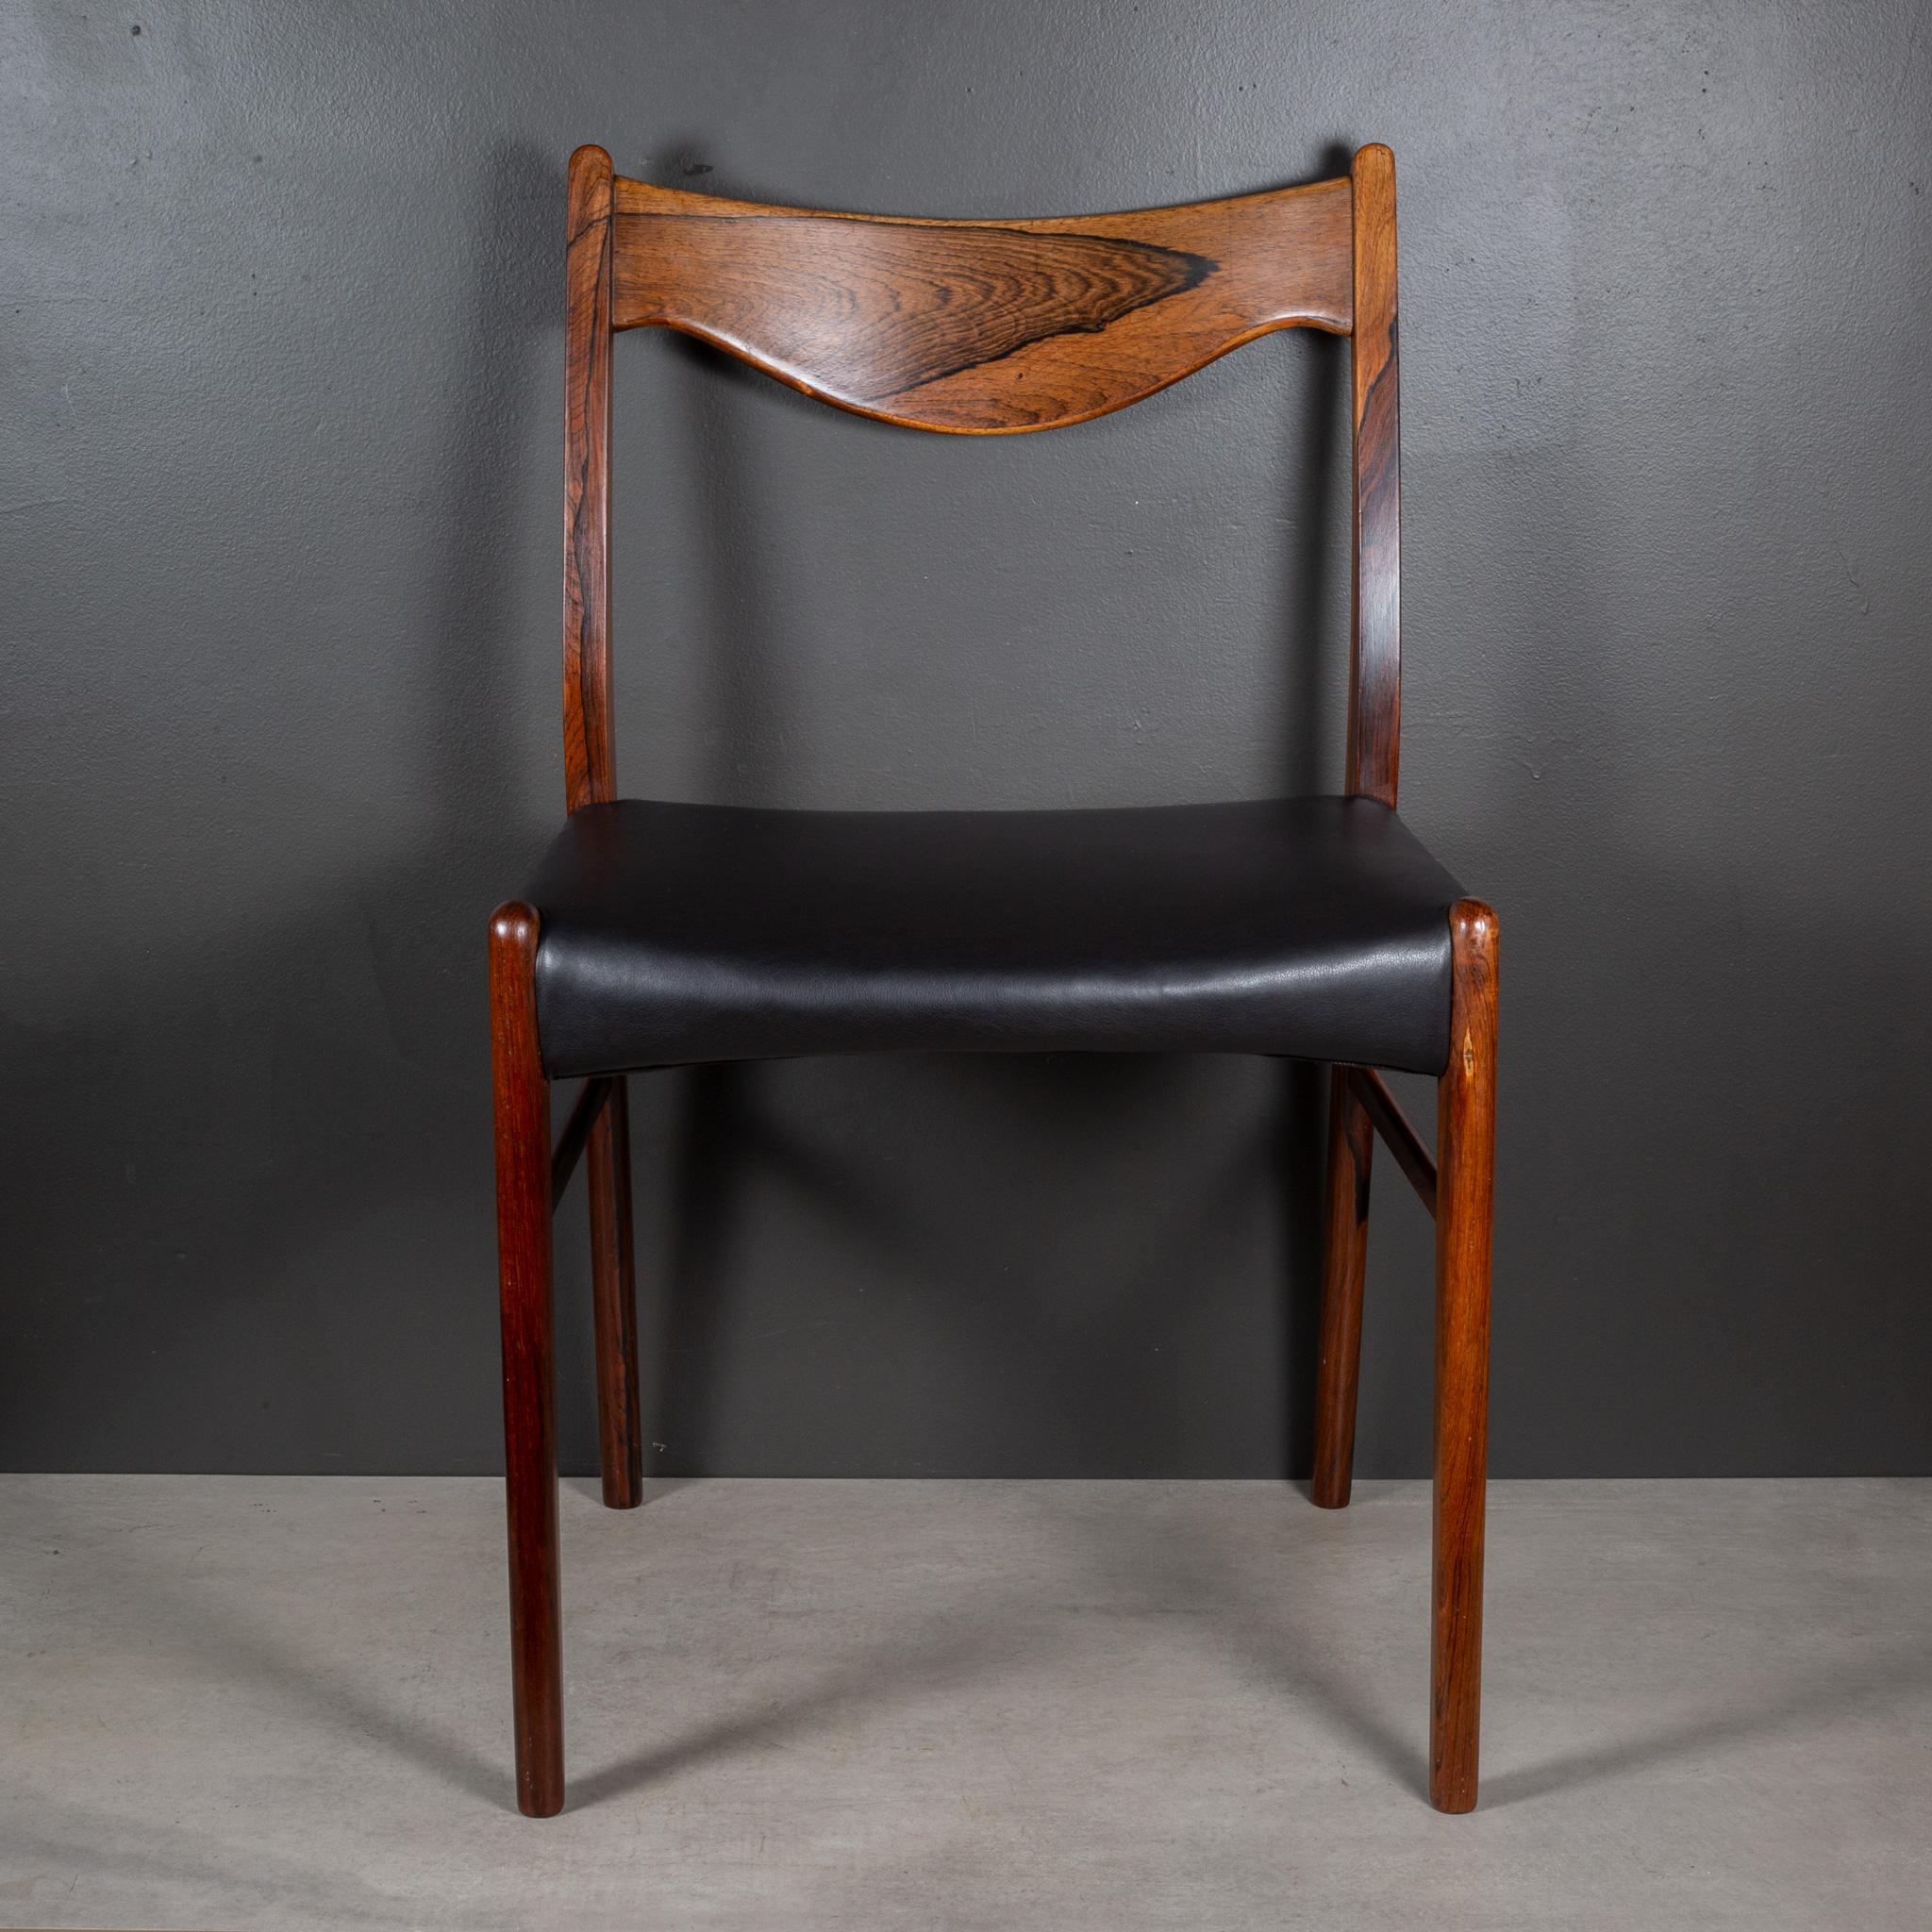 Arne Wahl Iversen Model GS61 Rosewood and Leather Dining Chairs c.1950 For Sale 9